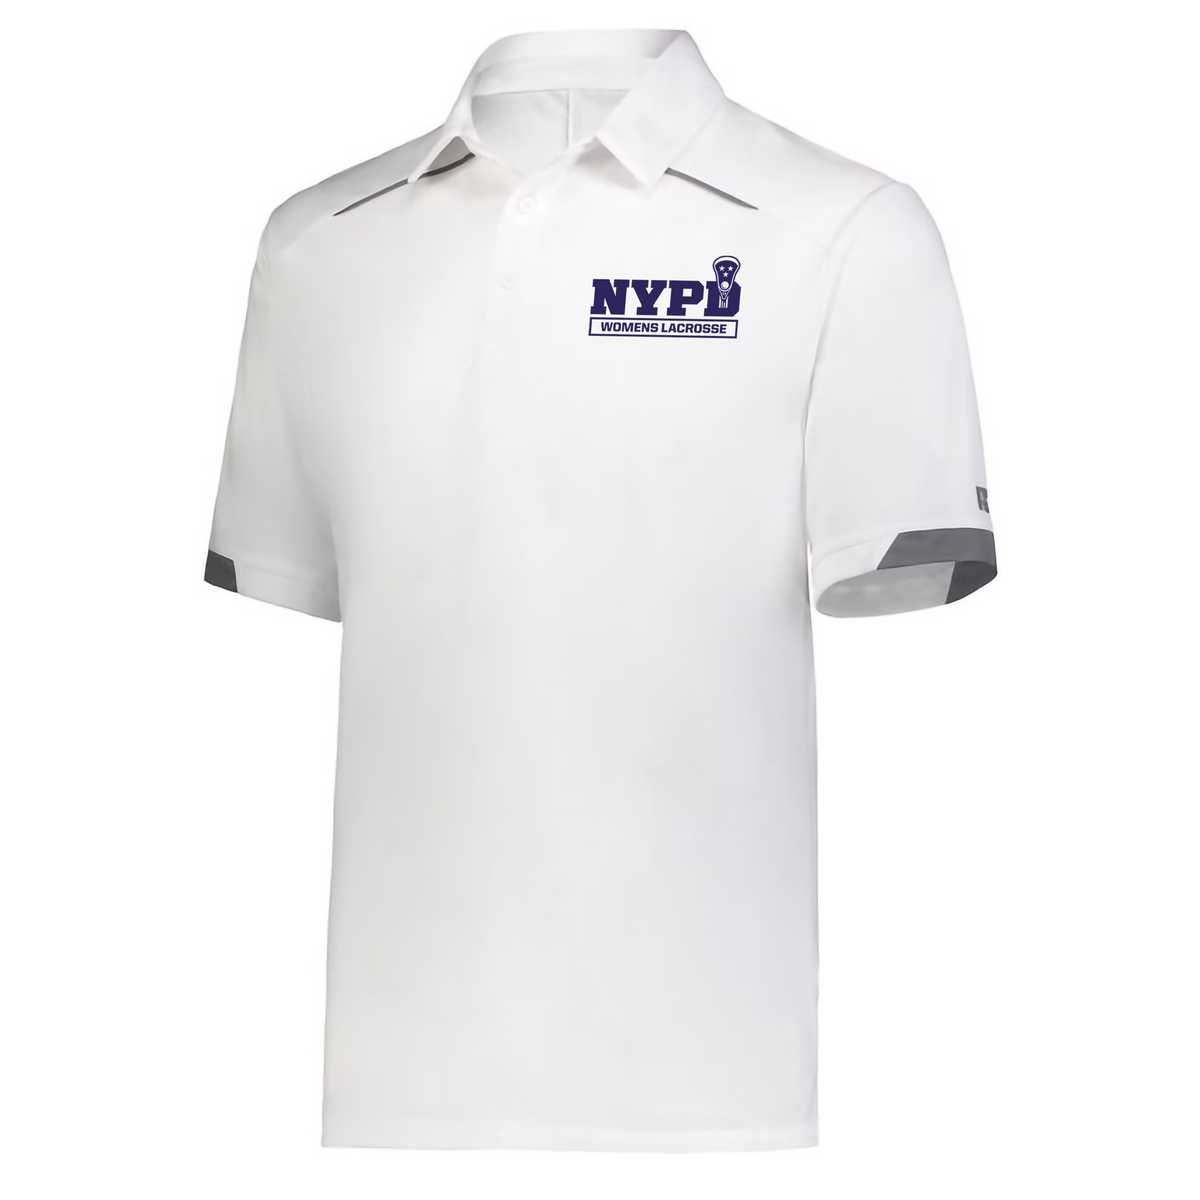 NYPD Womens Lacrosse Legend Polo